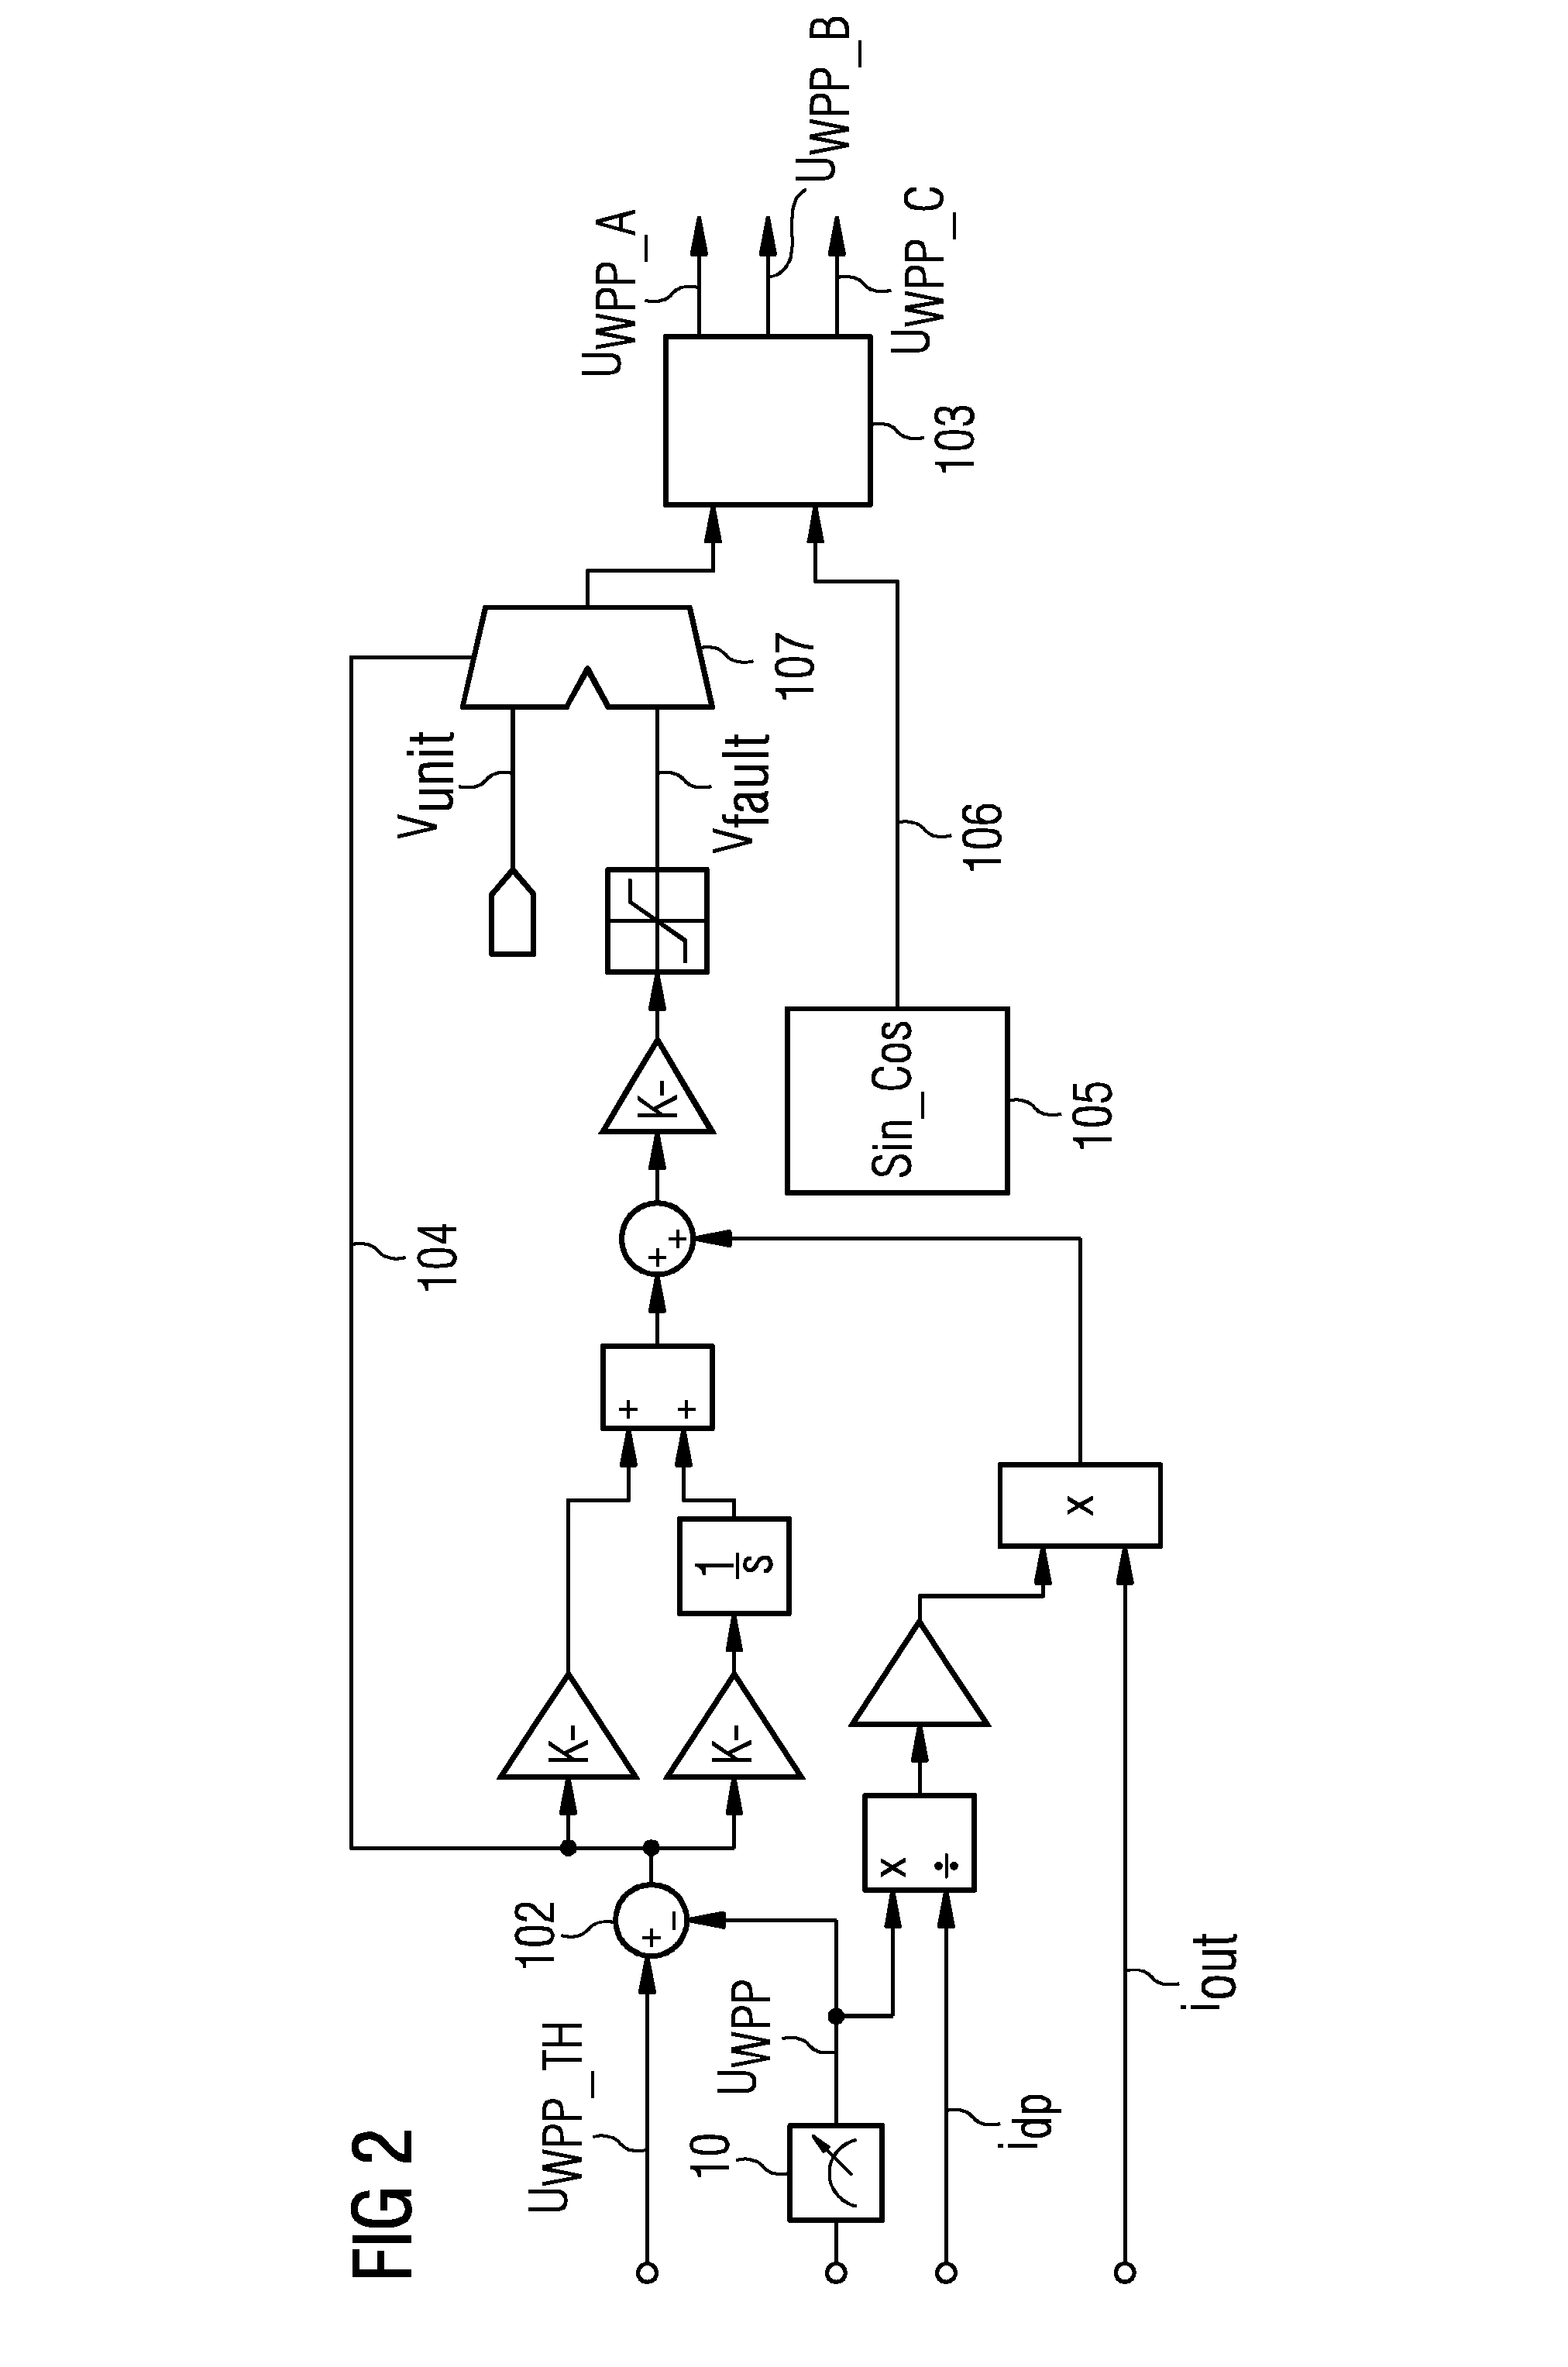 Method of controlling the power input to a HVDC transmission link